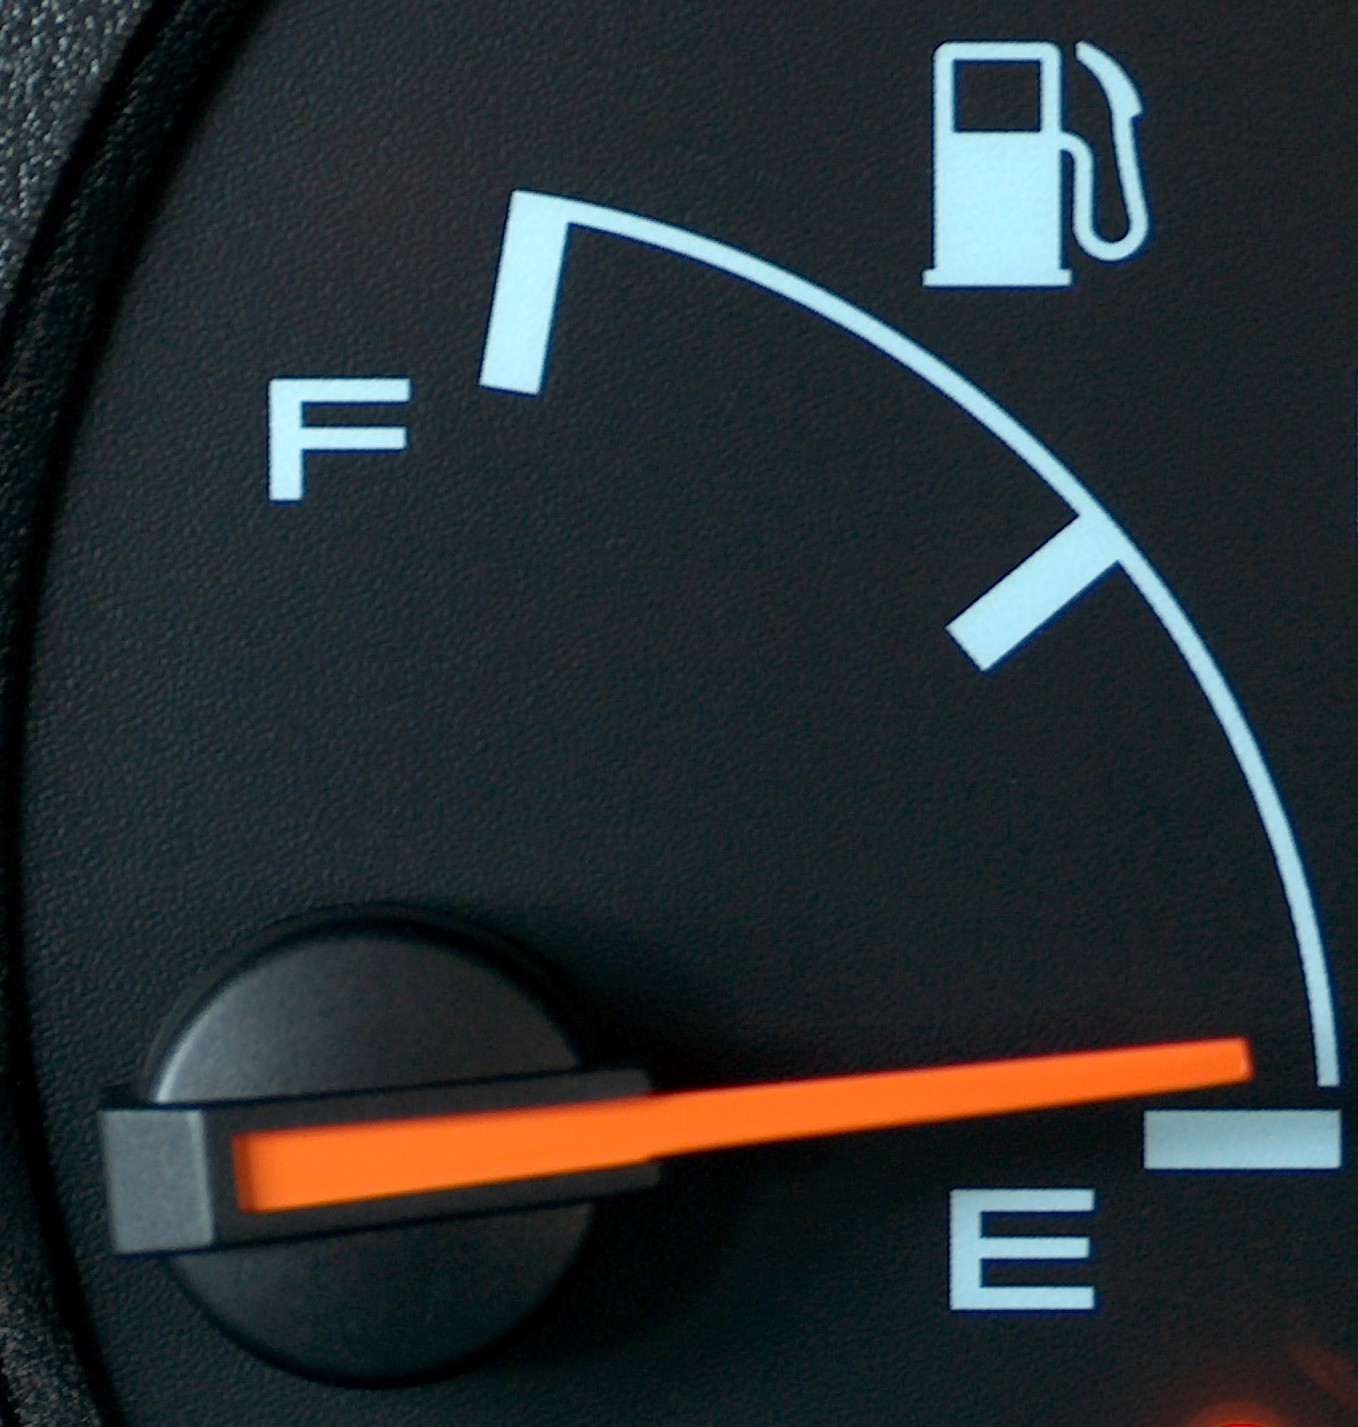 A photo of a car's fuel level, with the indicator pointing towards the 'empty' symbol.